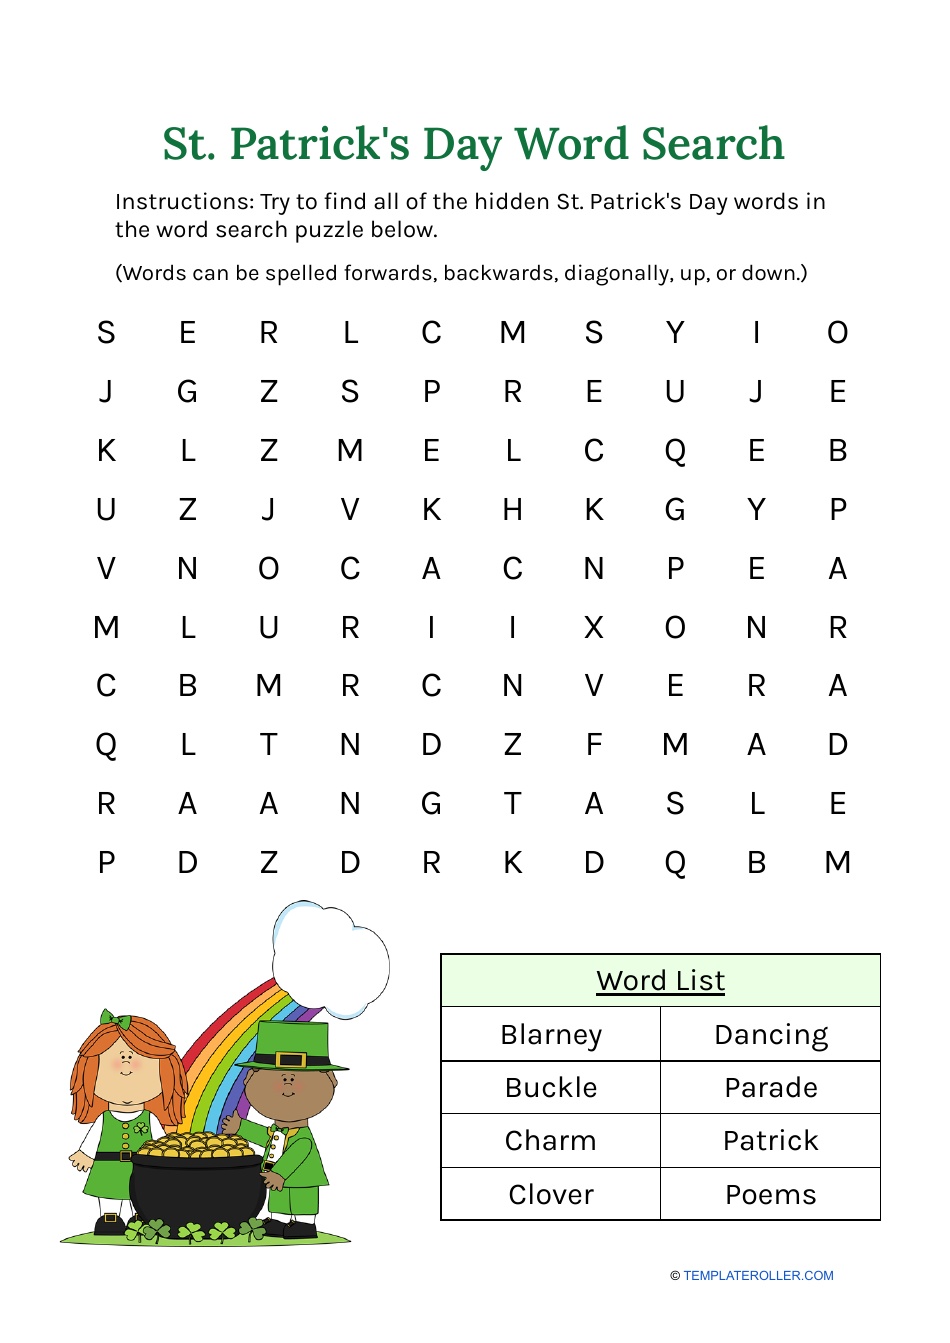 St. Patrick's Day Word Search featuring the theme of wealth.